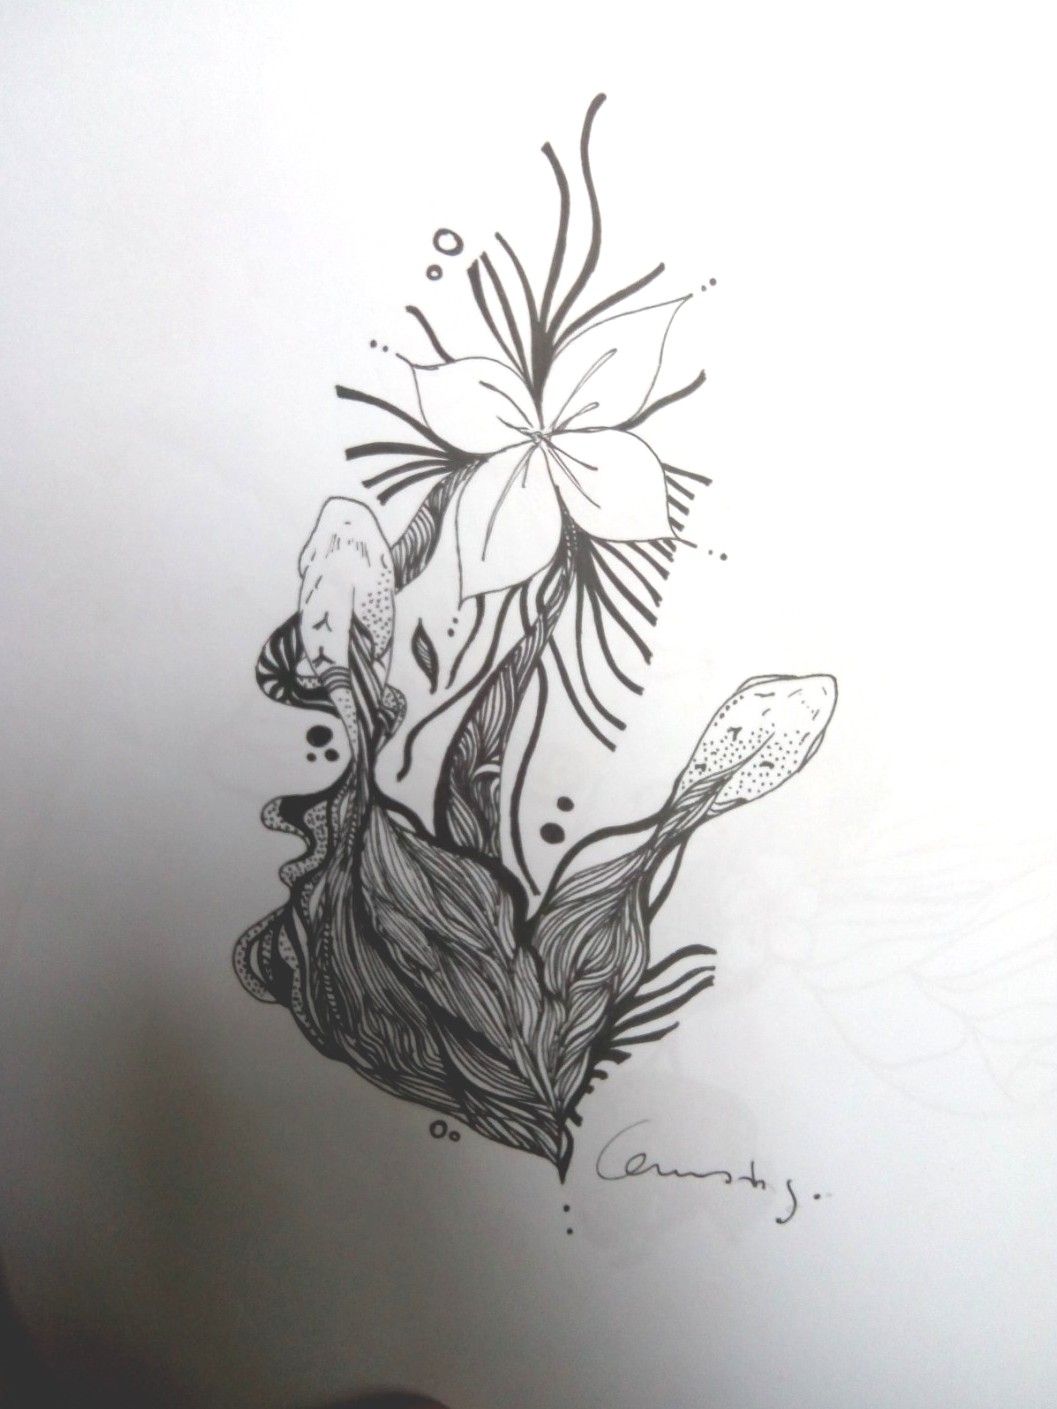 8 Deep and meaningful drawings ideas | drawings, art sketches, meaningful  drawings